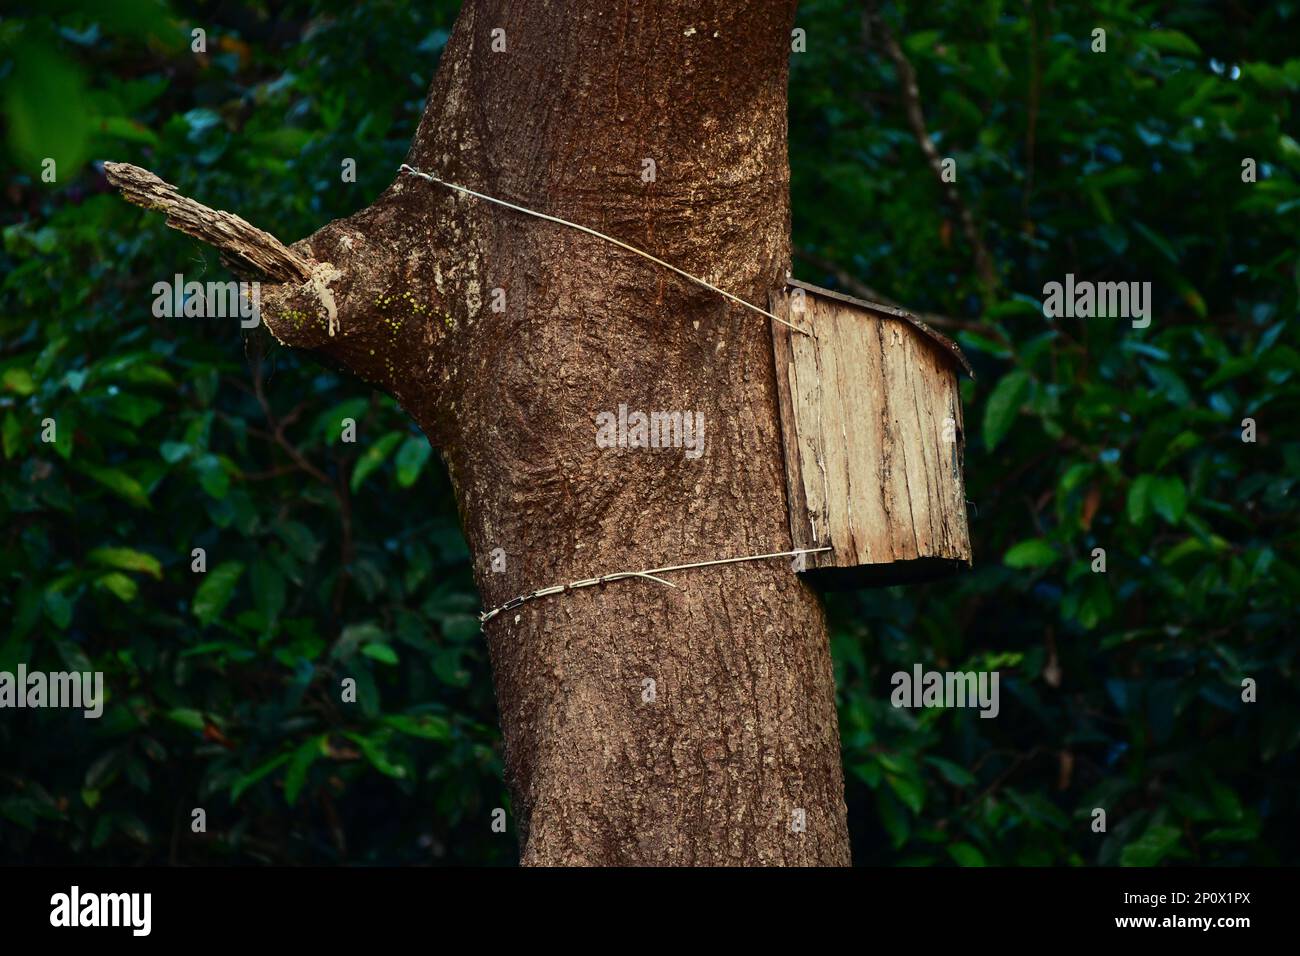 Old wooden birdhouse on a tree. Conservation project for Hornbill Birds in Borneo Stock Photo